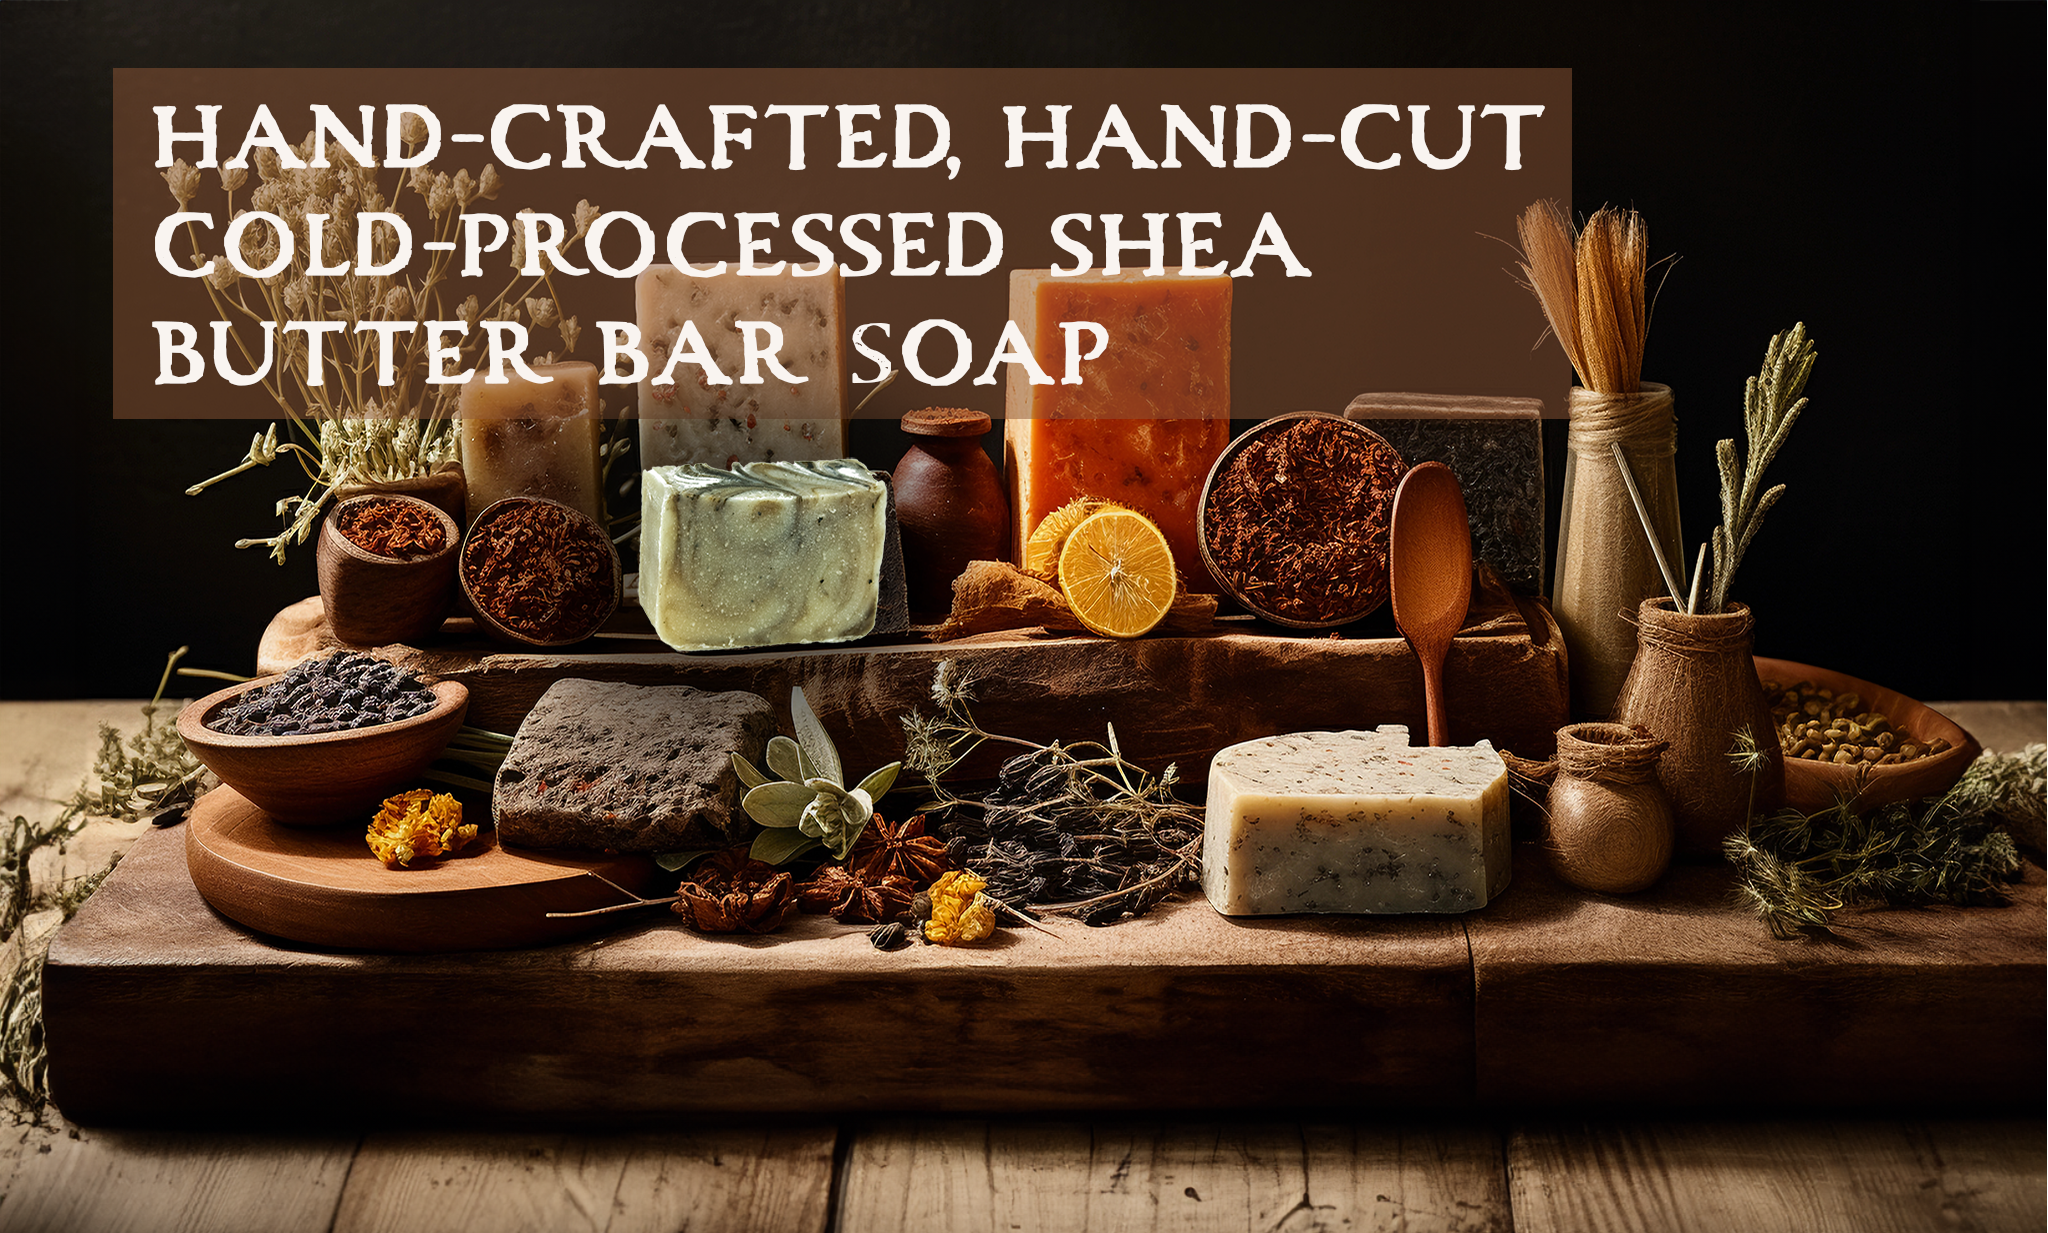 organic cold-processed, handmade, handcut, shea butter bar soap made with certified organic ingredients, plant-based botanicals and essential oils